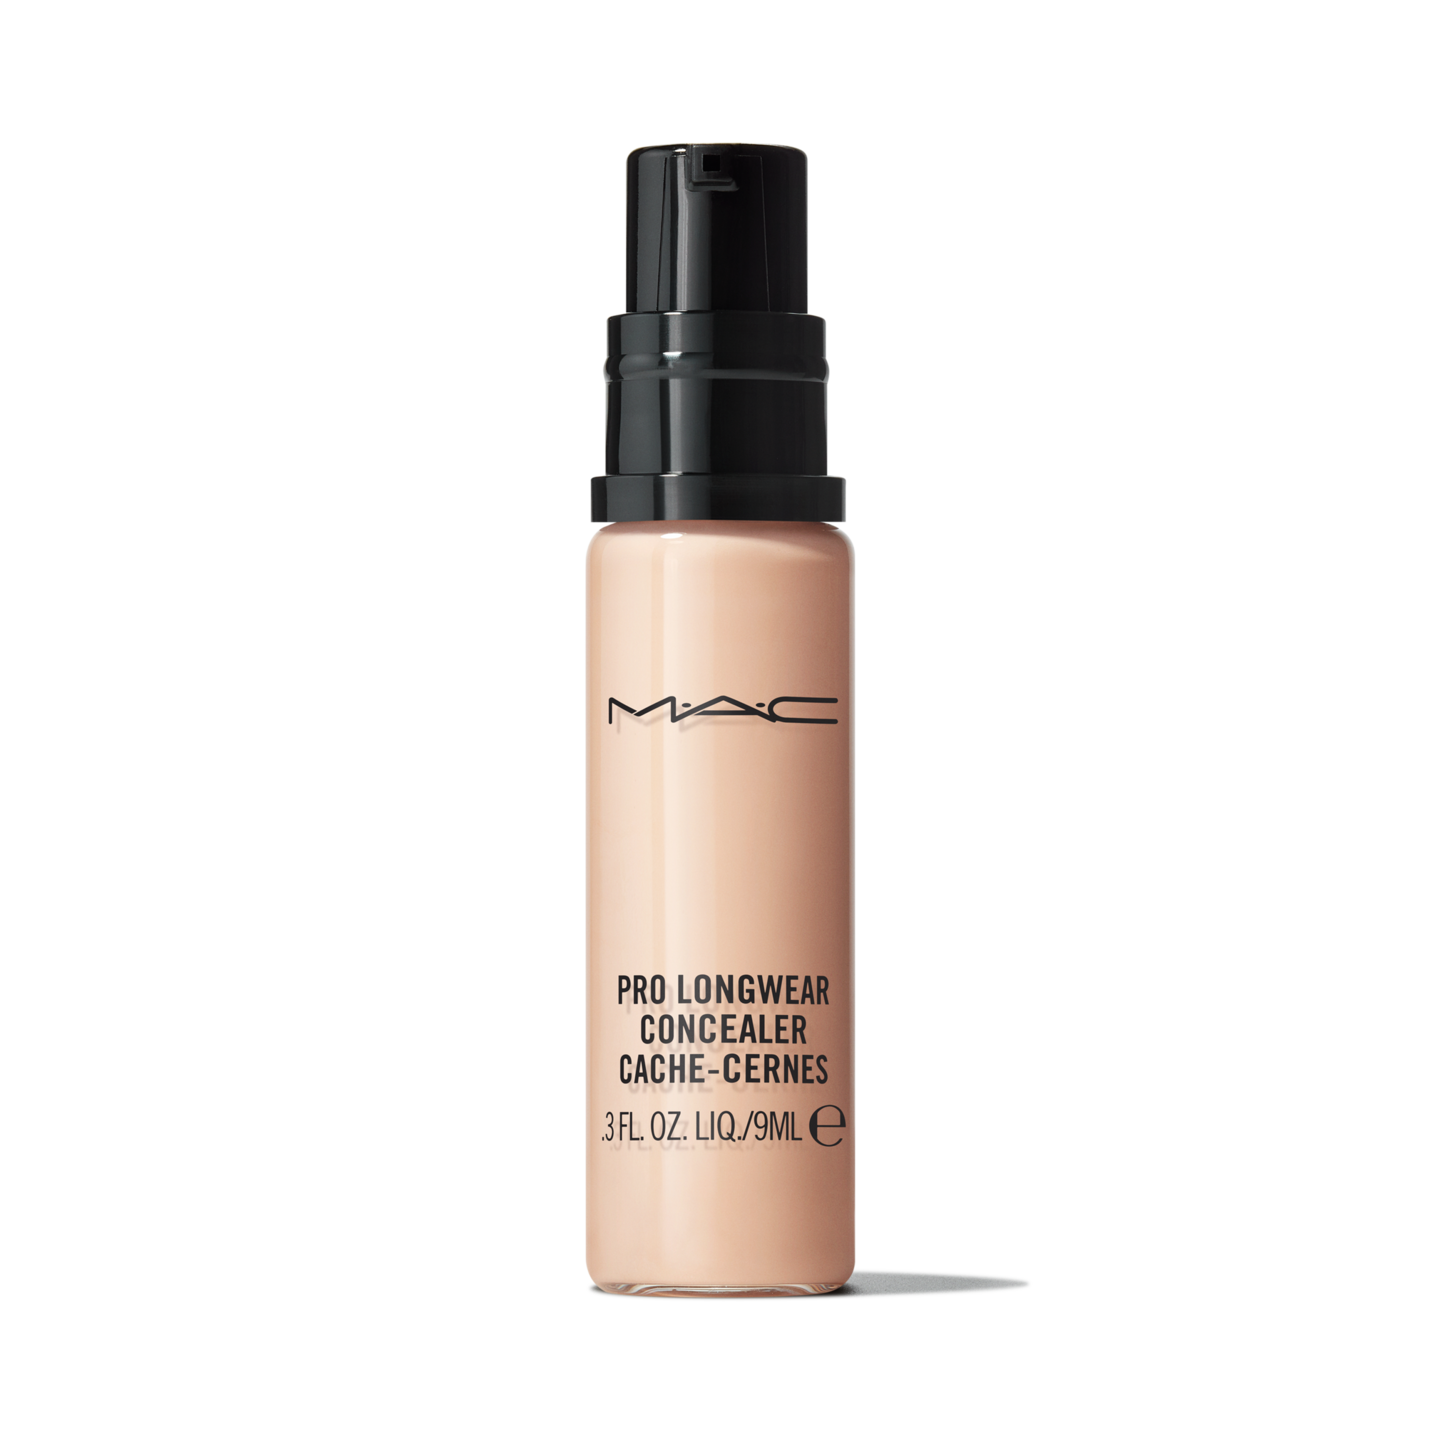 Pro Longwear Concealer Coverage | MAC Cosmetics - Official Site